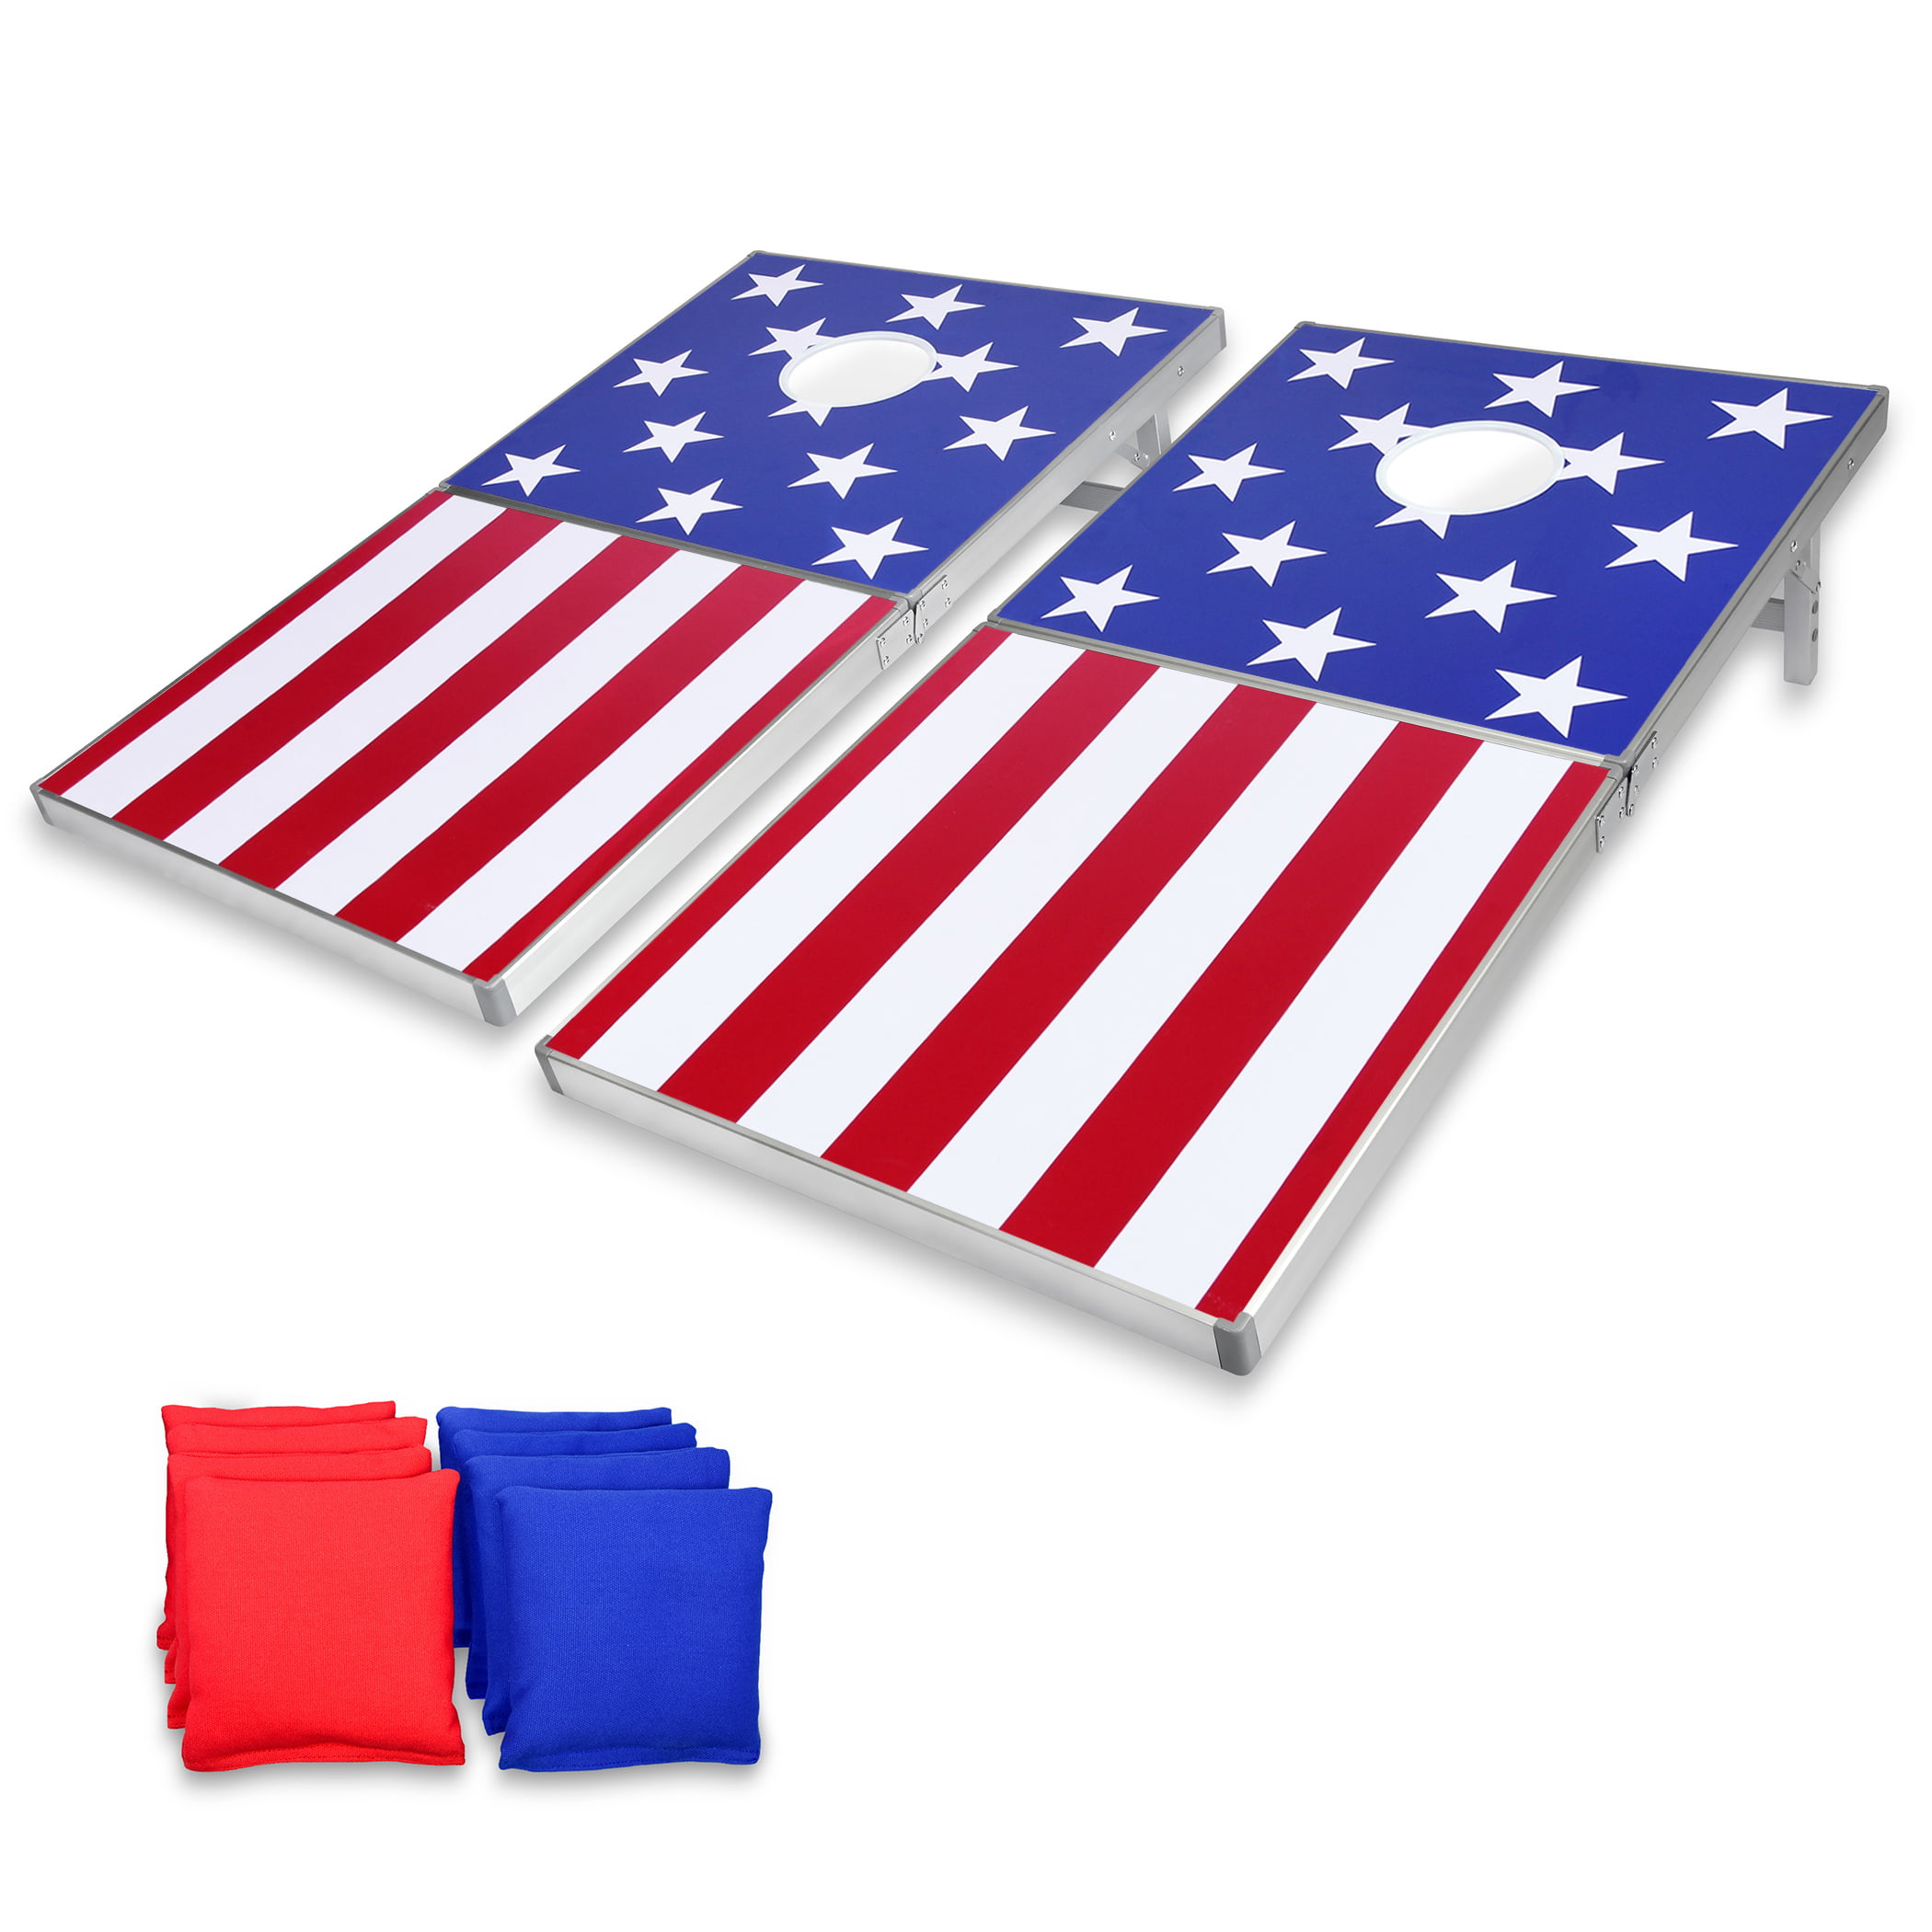 CORNHOLE BEANBAG TOSS GAME w Bags Game Boards American Maryland Flag Set 1027 